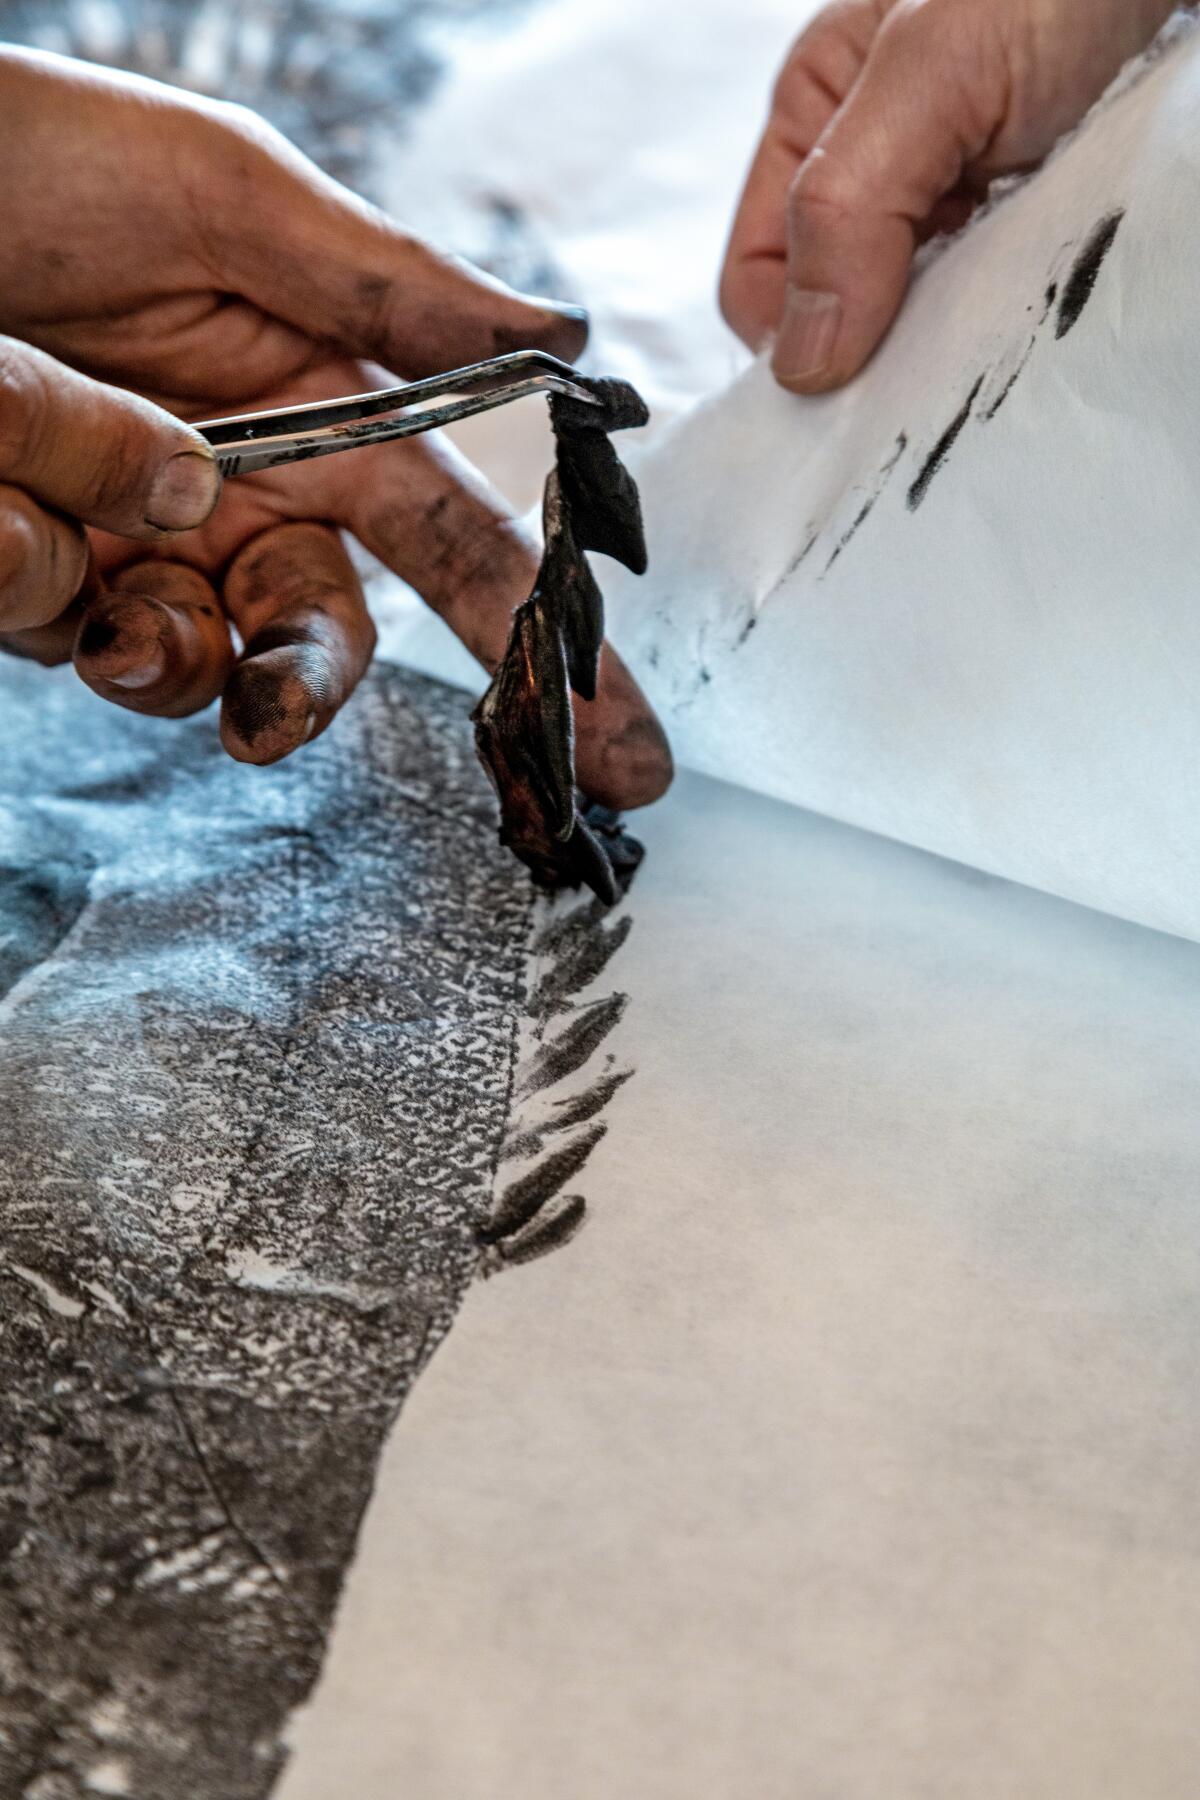 A dorsal fin covered in ink is used to make an imprint.